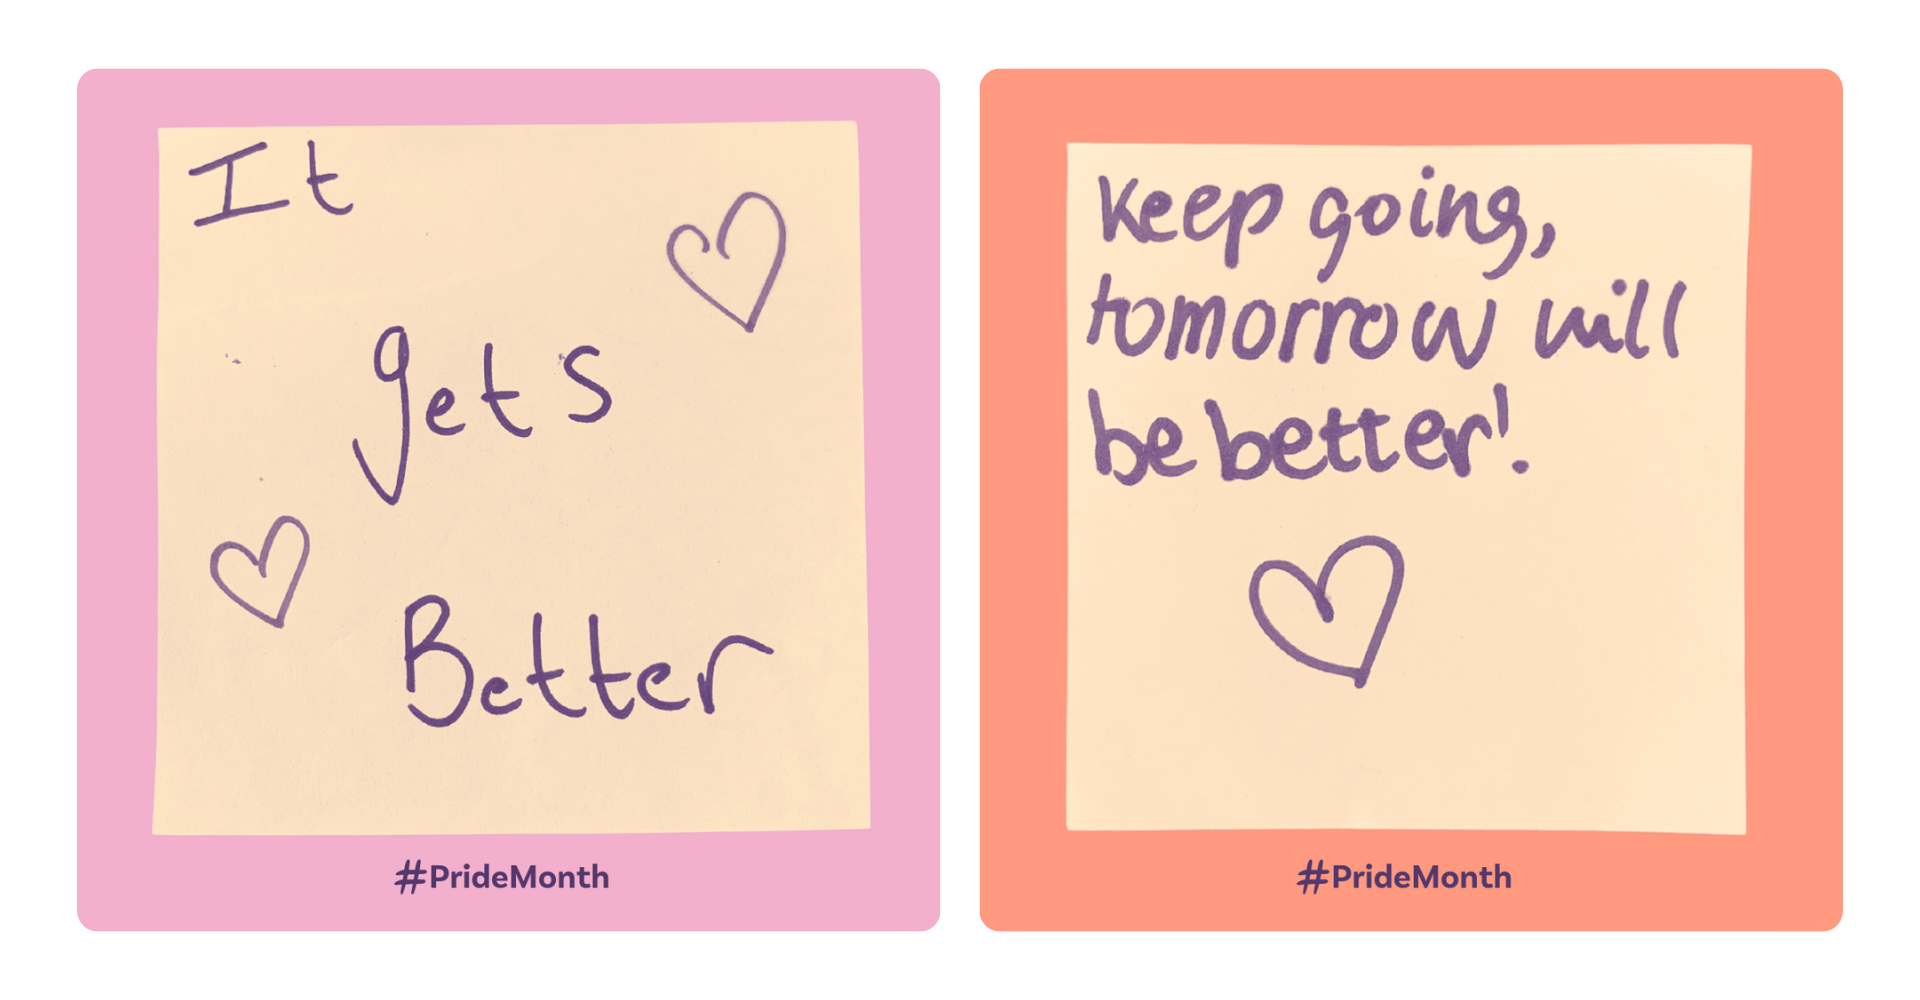 Two images of post-it notes with writing on them. Note 1 reads: "It gets better" Note 2 reads: "Keep going, tomorrow will be better!"